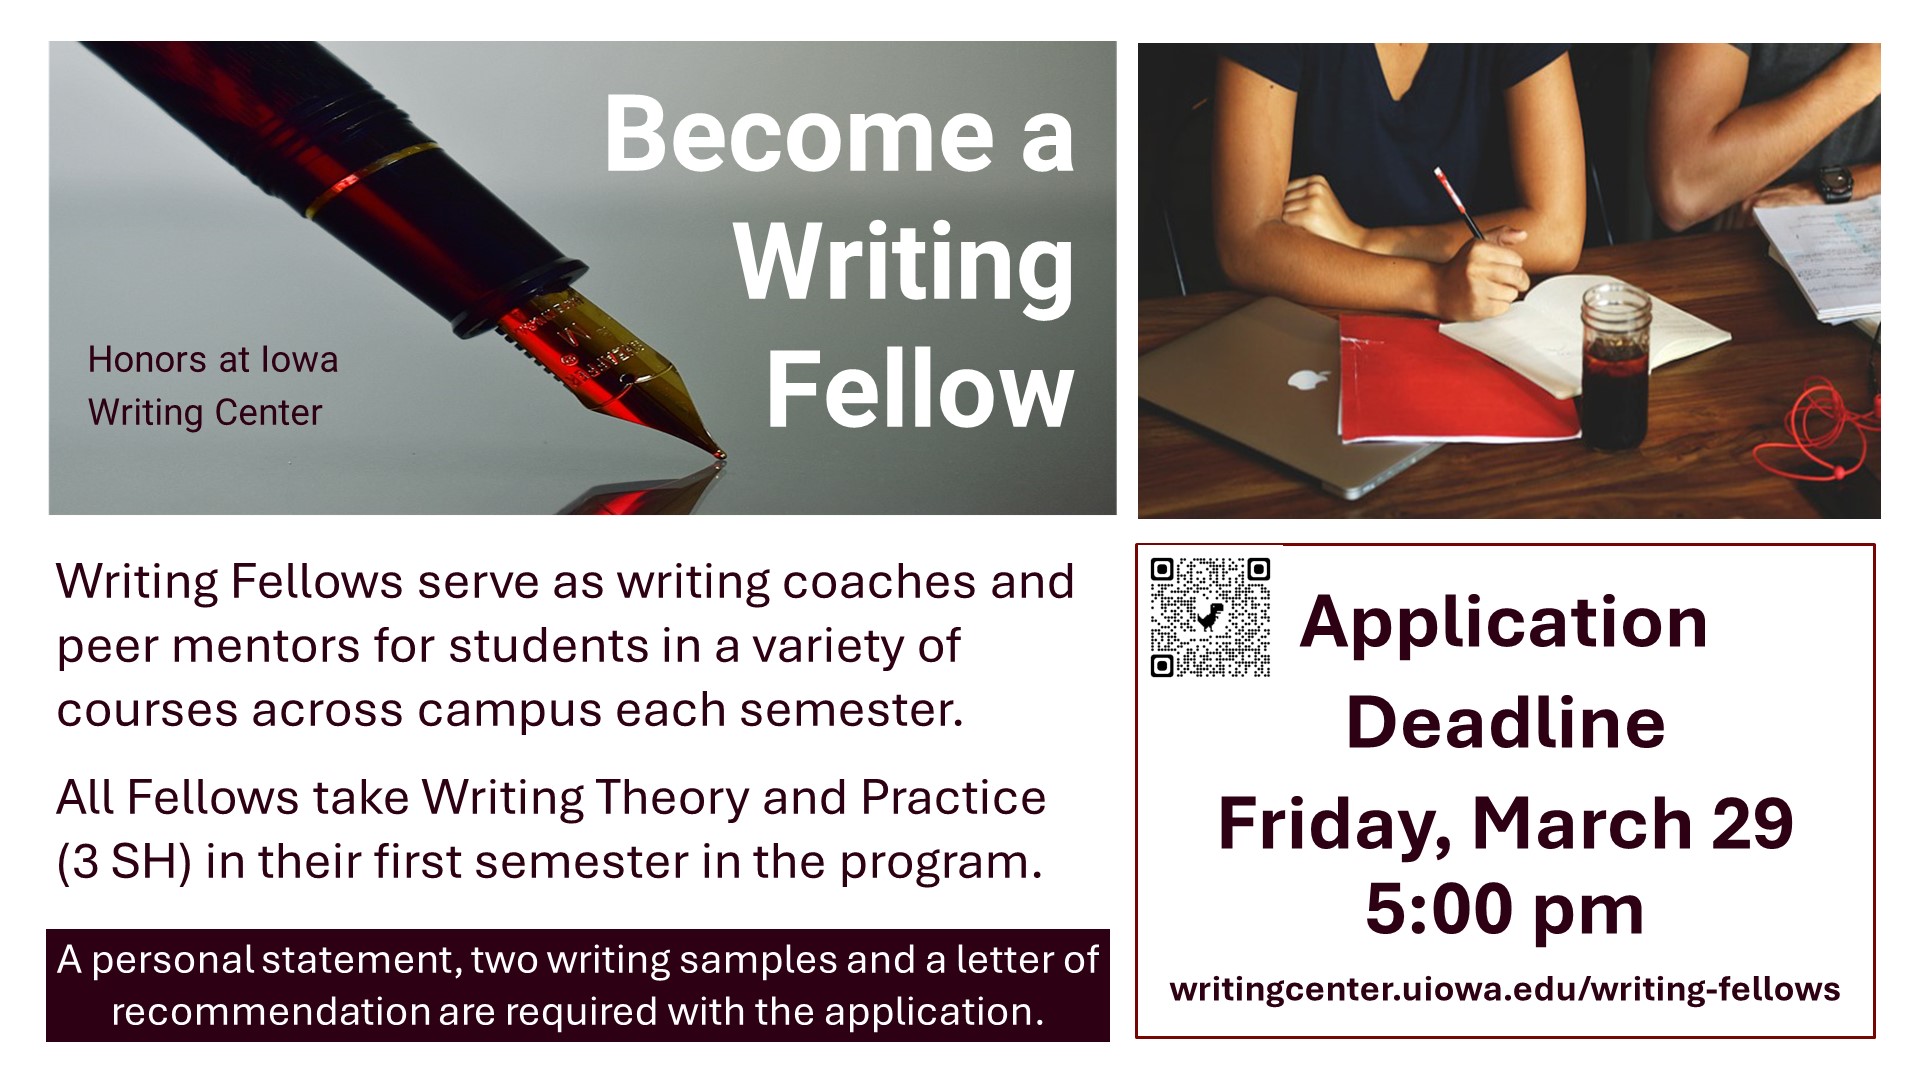 Become a Writing Fellow